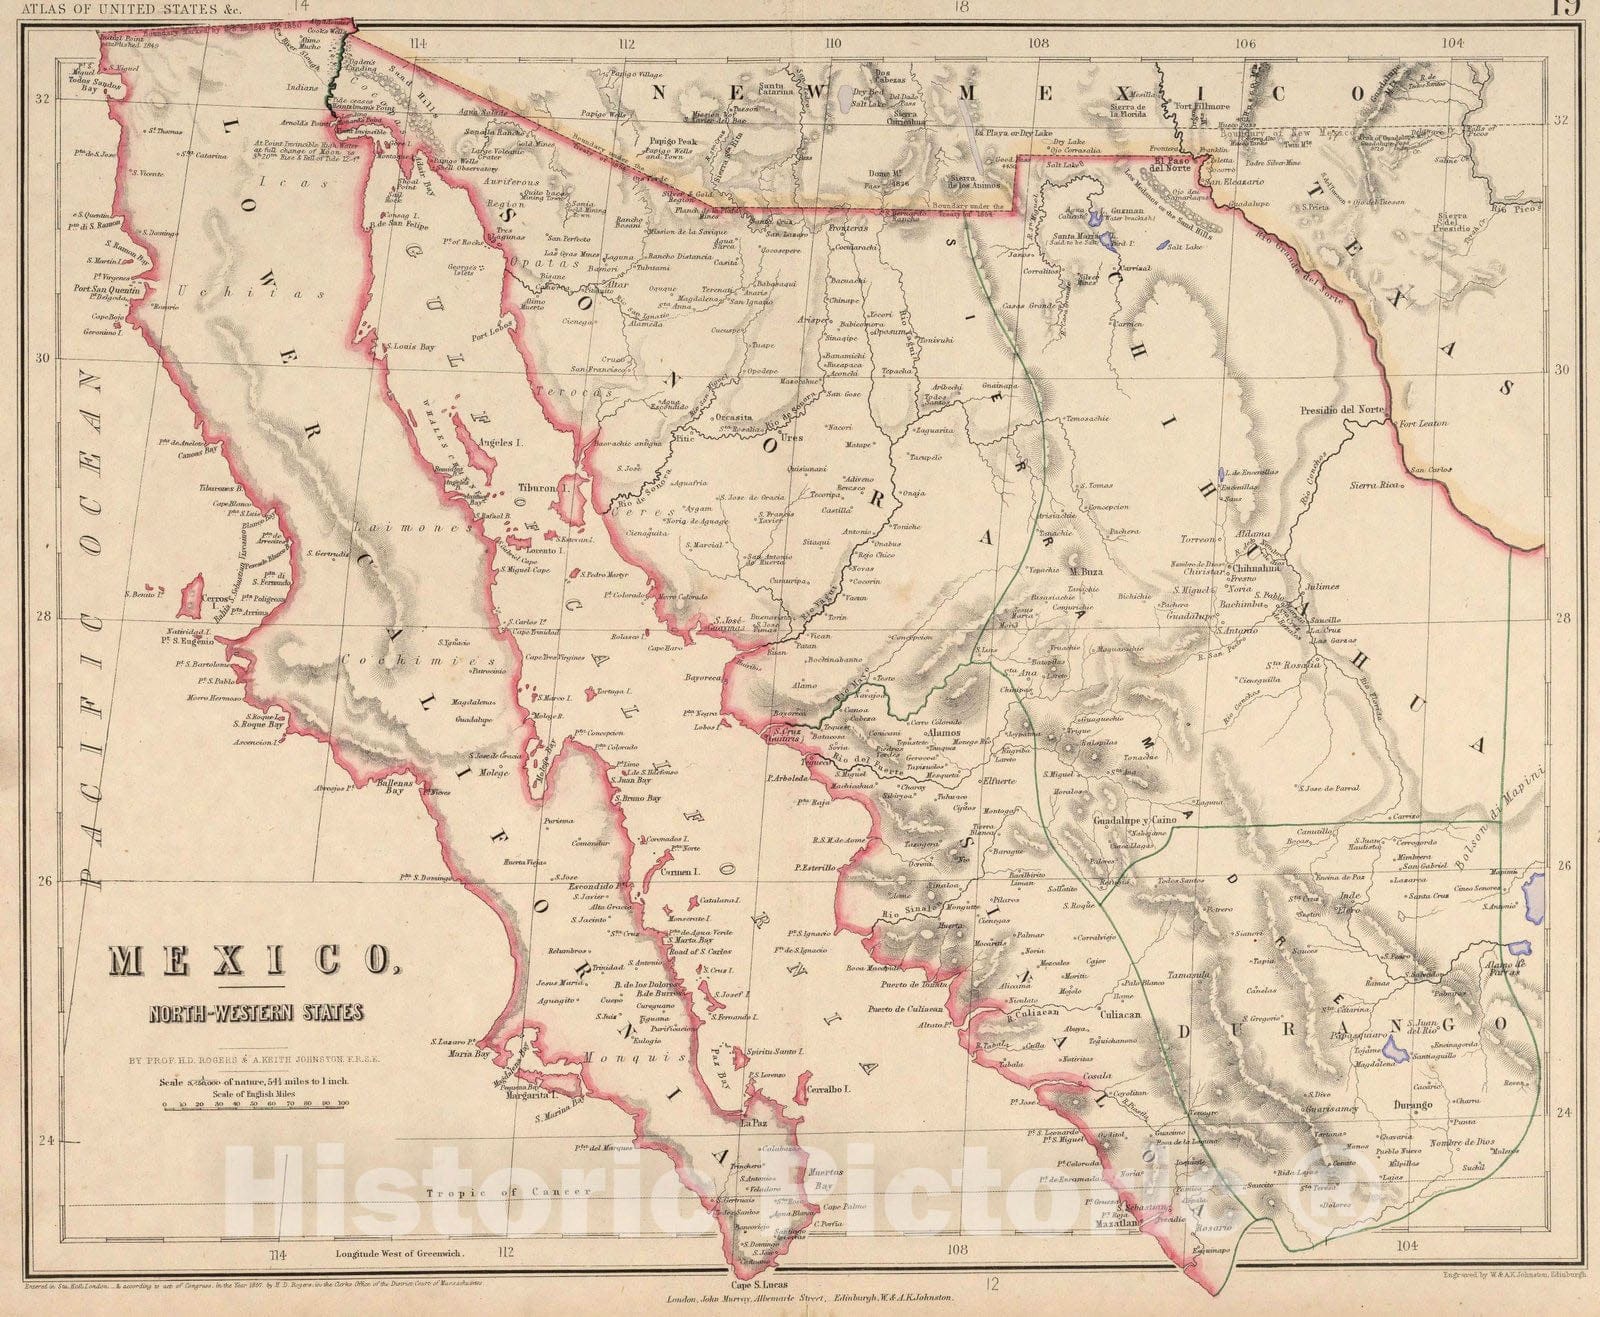 Historic Map : National Atlas - 1857 Mexico, North-western States. - Vintage Wall Art